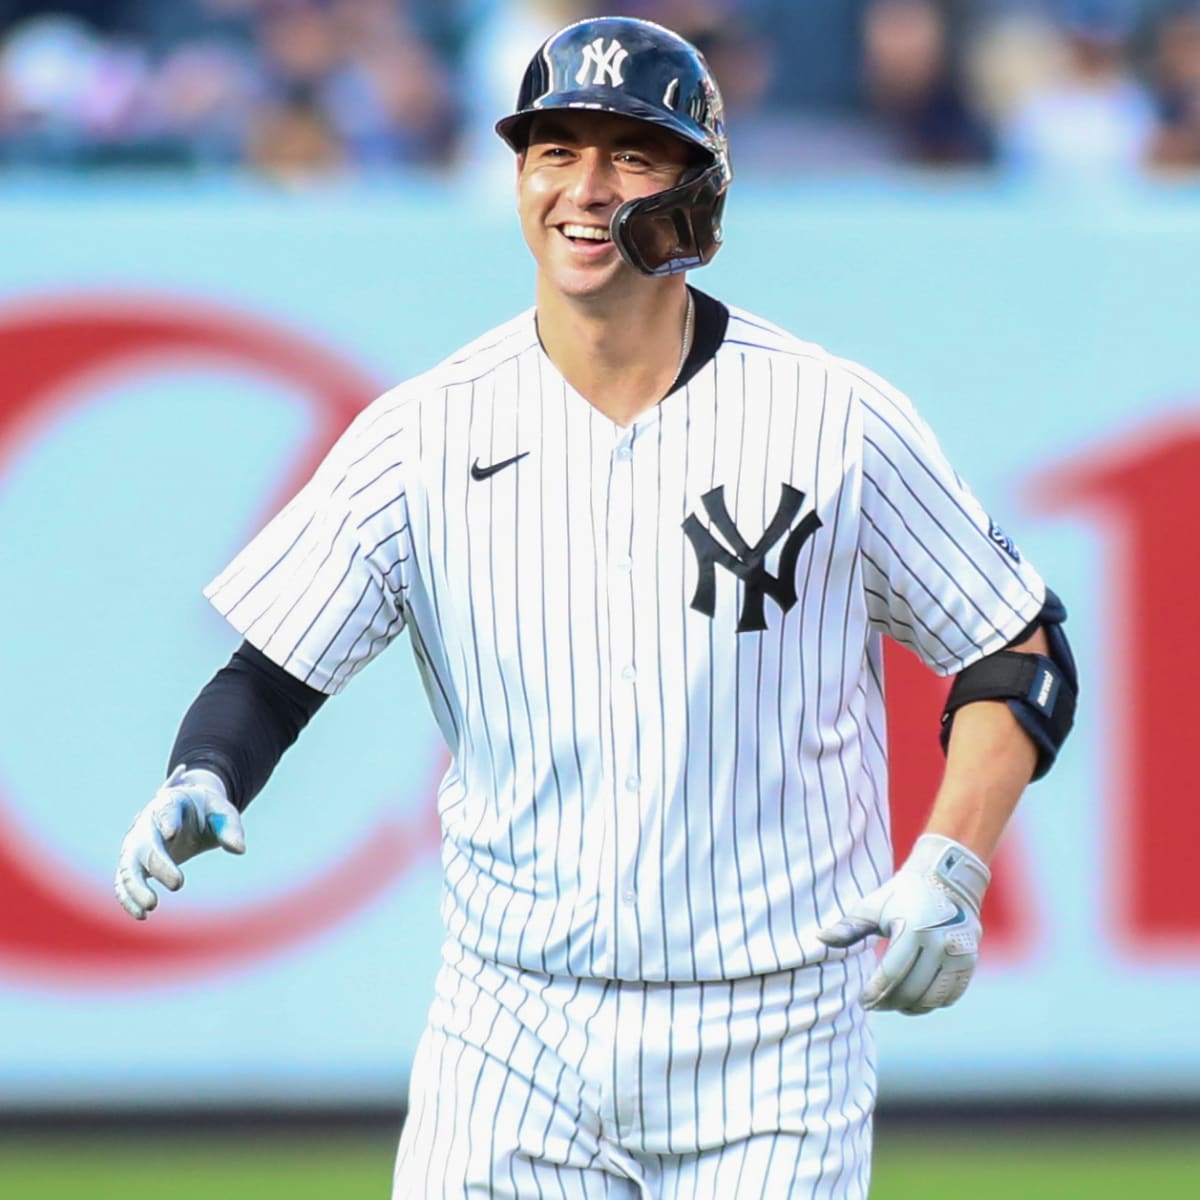 Kyle Higashioka will have to be ready for the Yankees in 2021